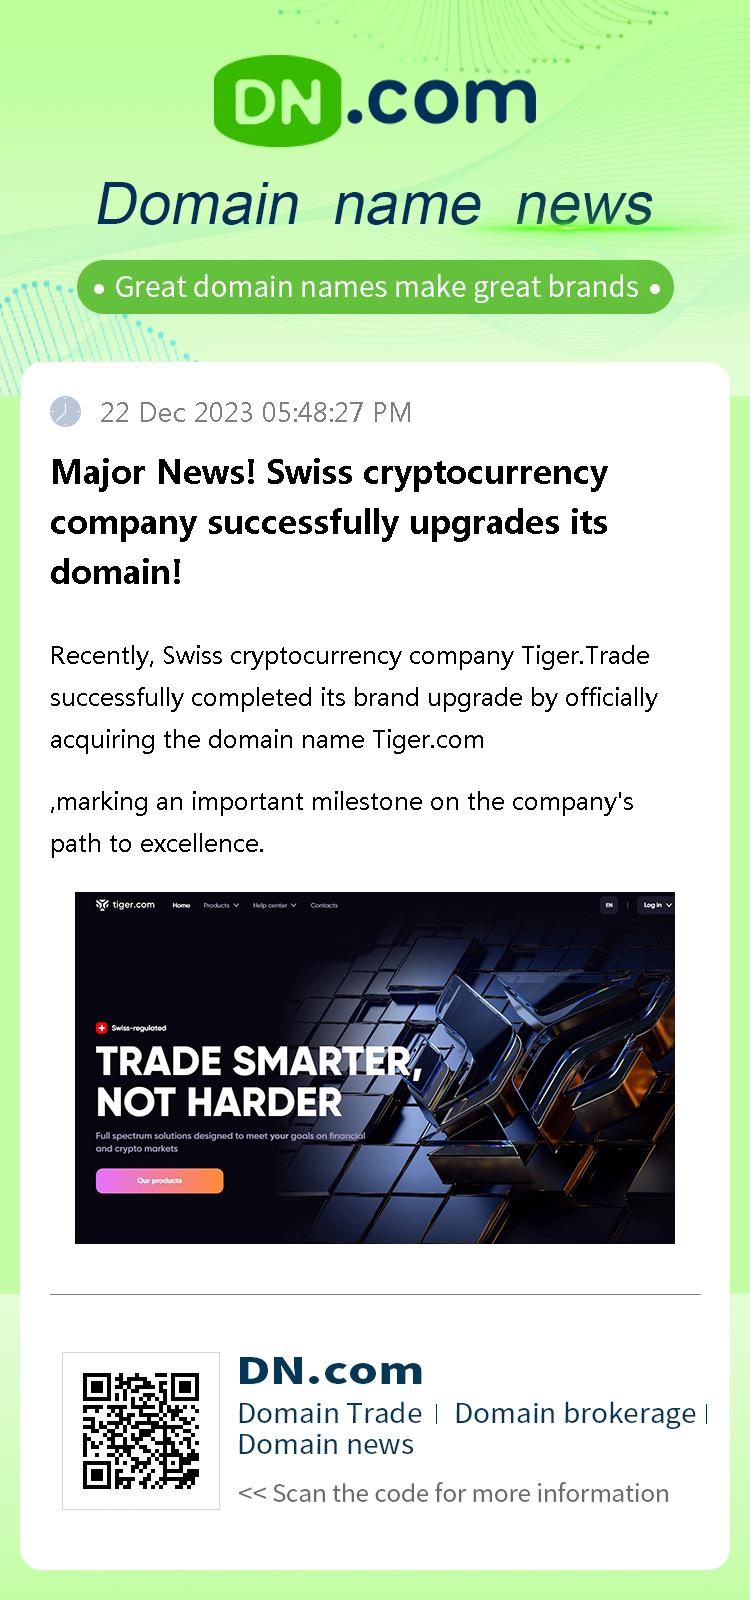 Major News! Swiss cryptocurrency company successfully upgrades its domain!